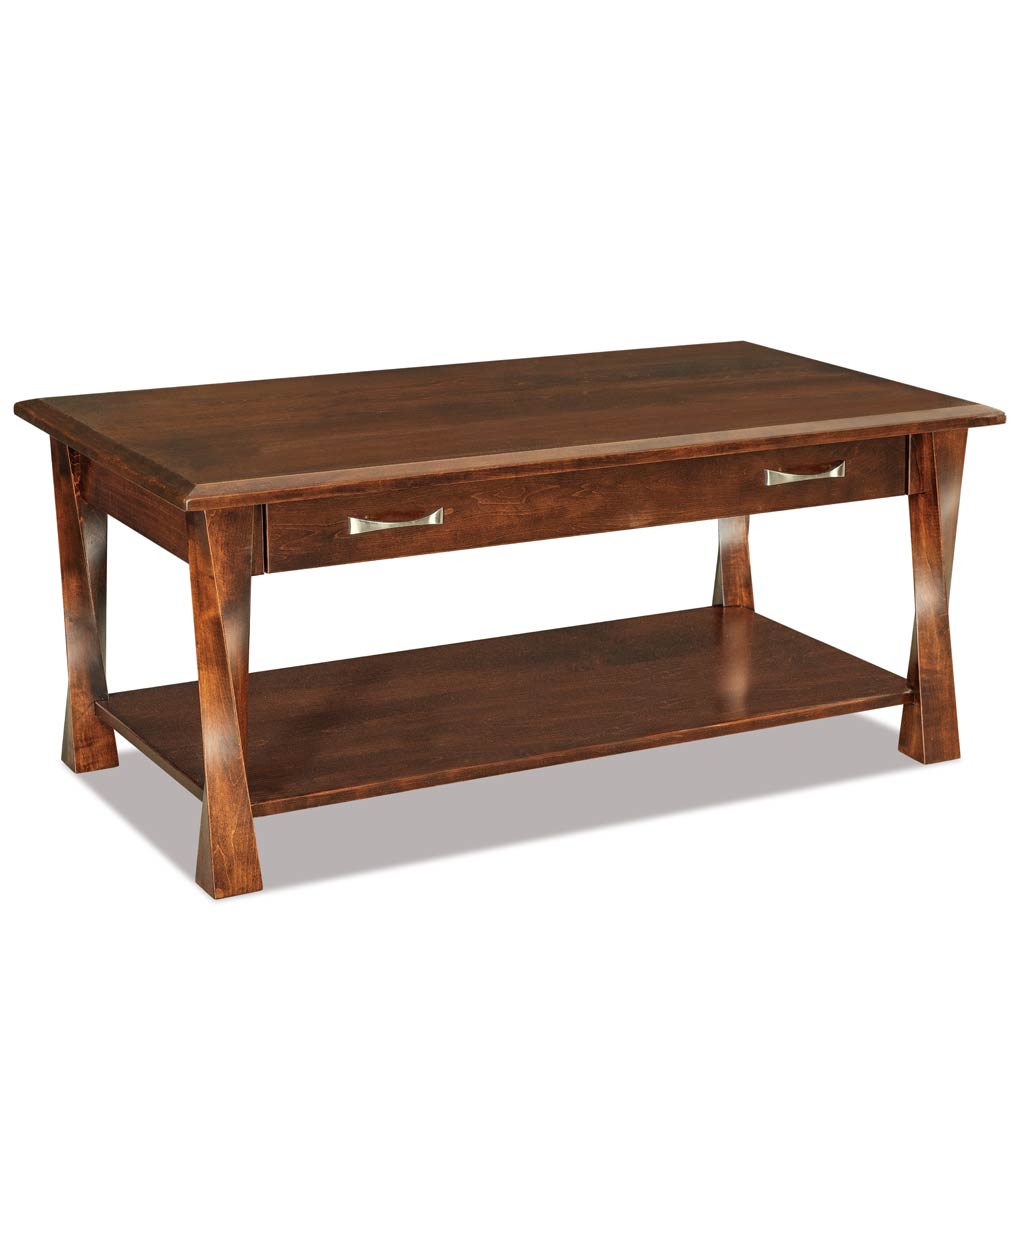 Lexington Arc Open Coffee Table with Drawer [FVCT-LA]